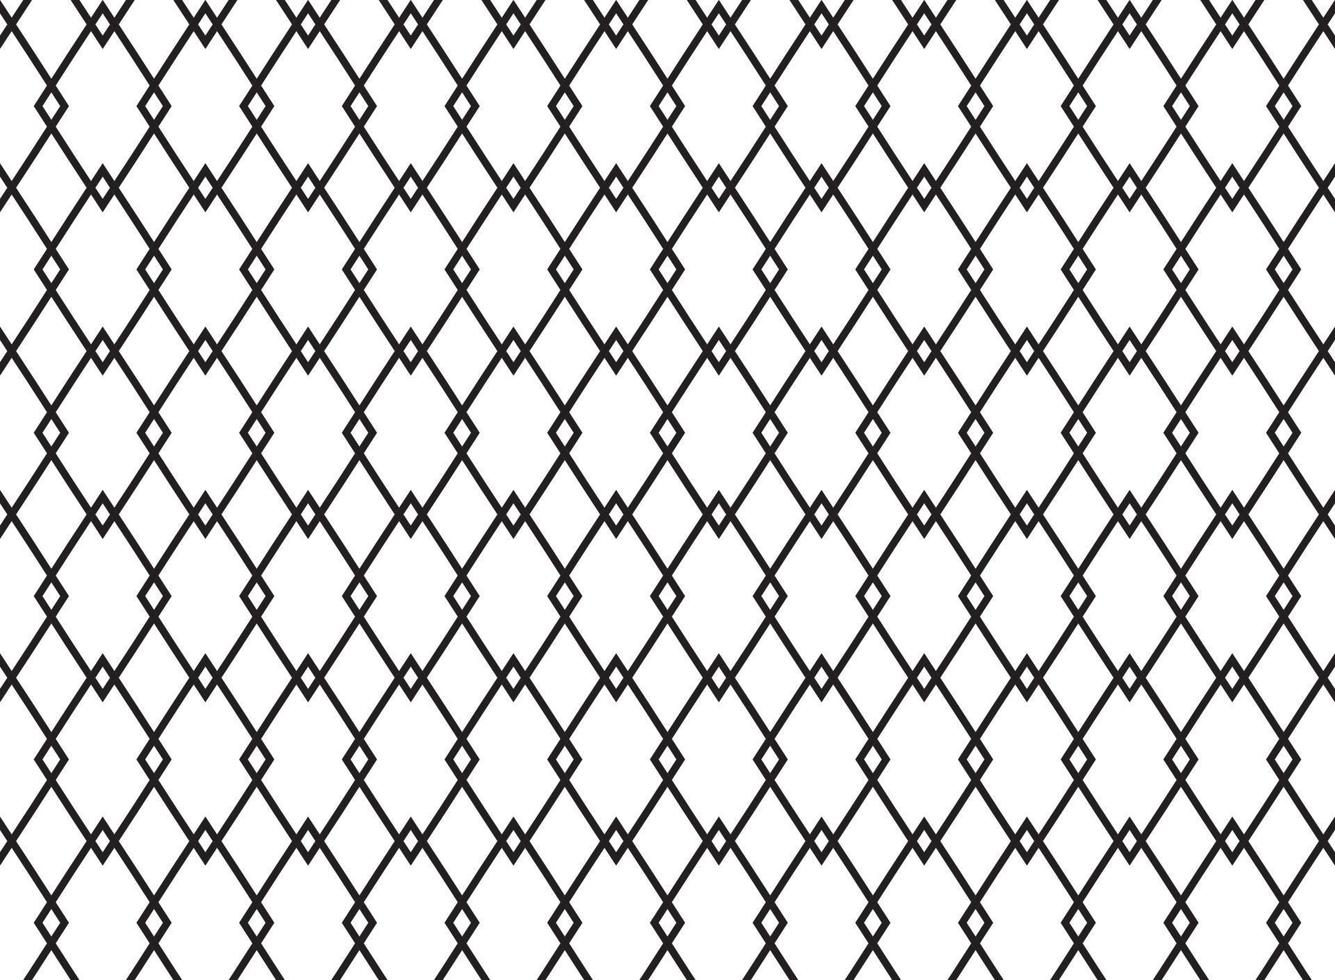 Seamless pattern with black and white colour, modern stripes background, geometric design pattern. Vector illustration.